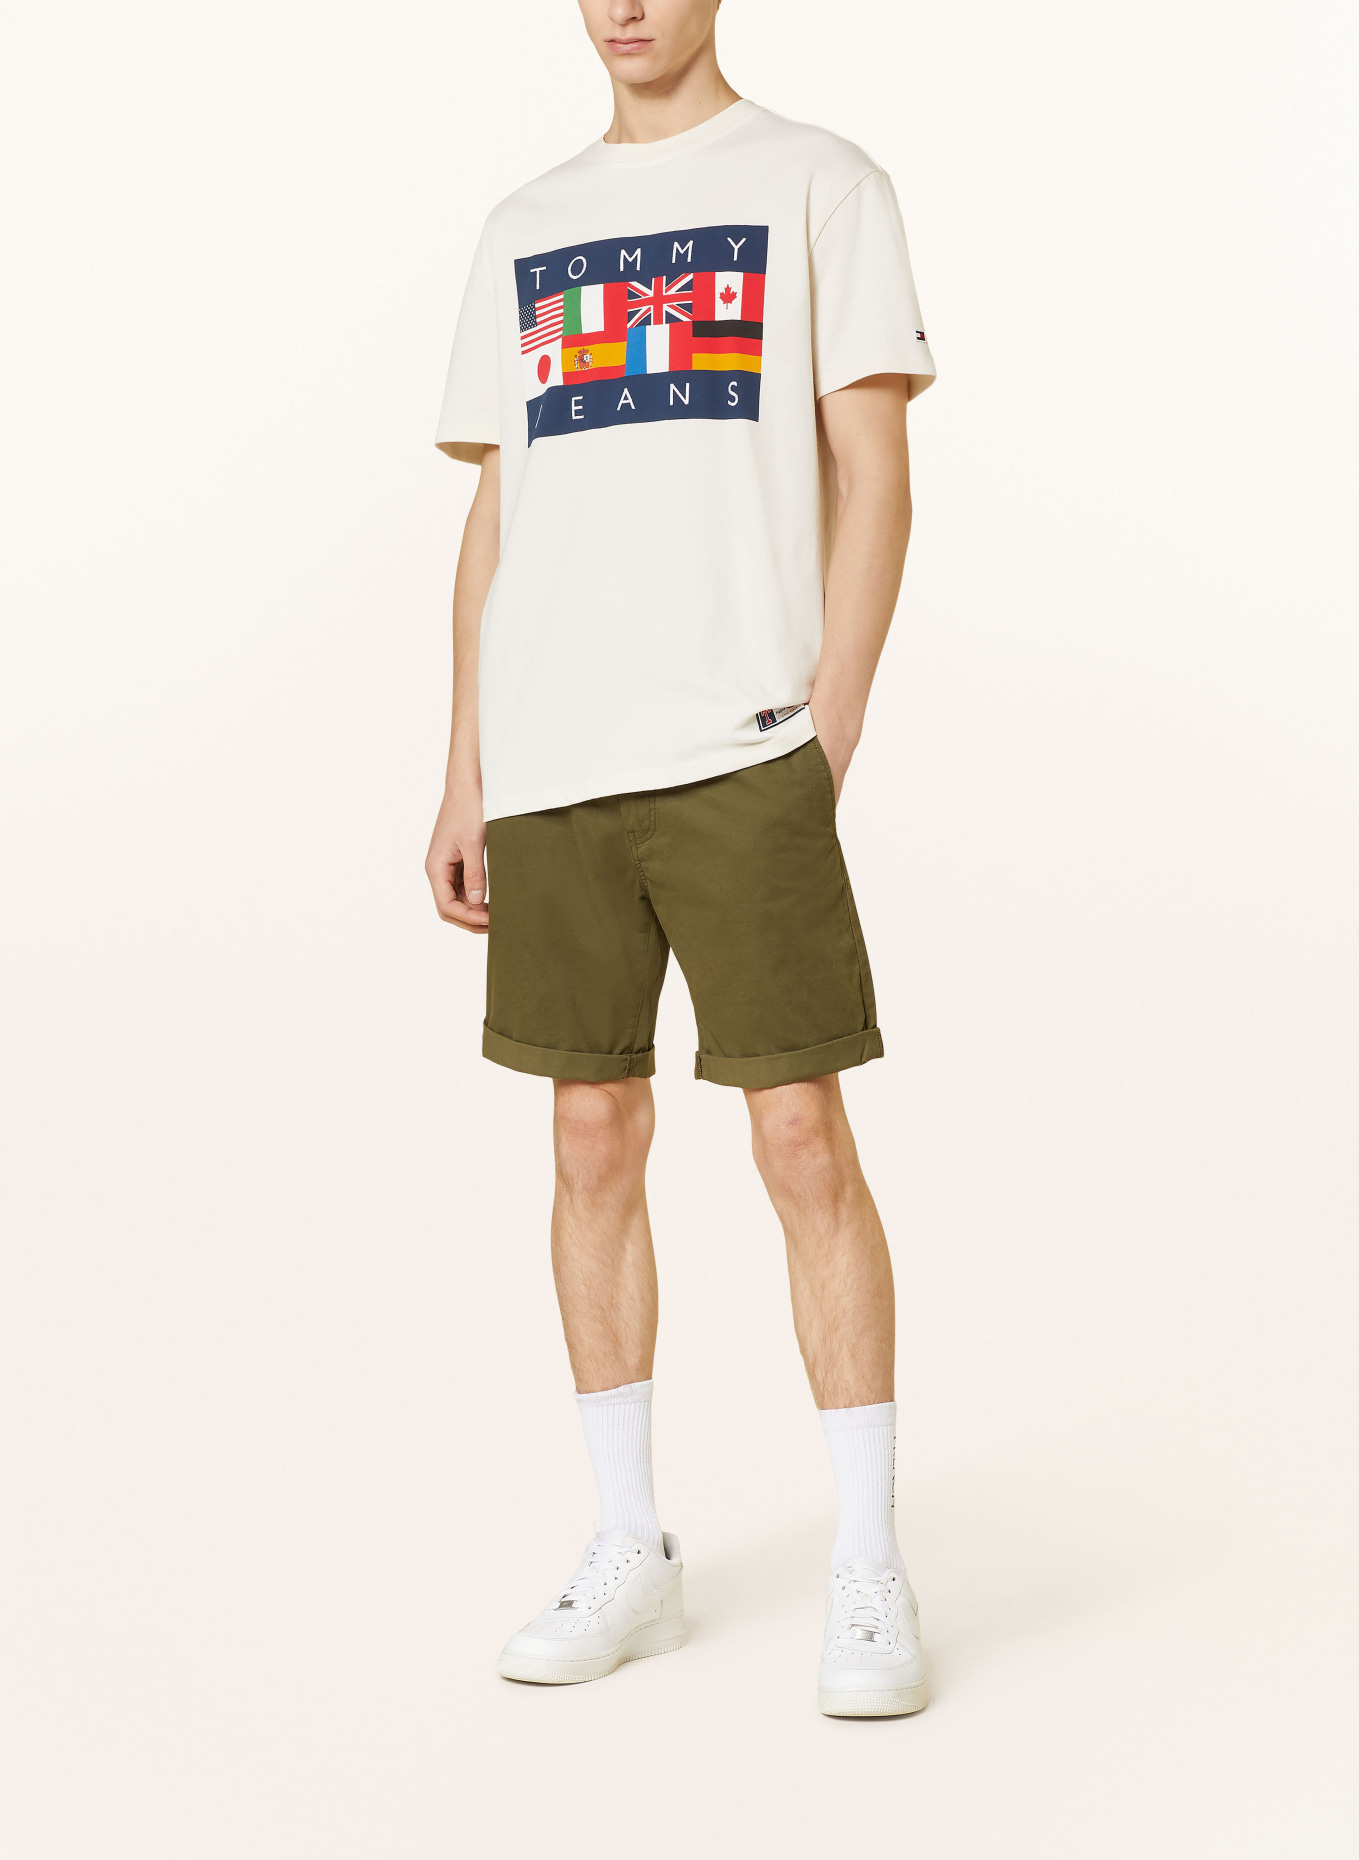 TOMMY JEANS T-shirt, Color: CREAM/ DARK BLUE/ RED (Image 2)